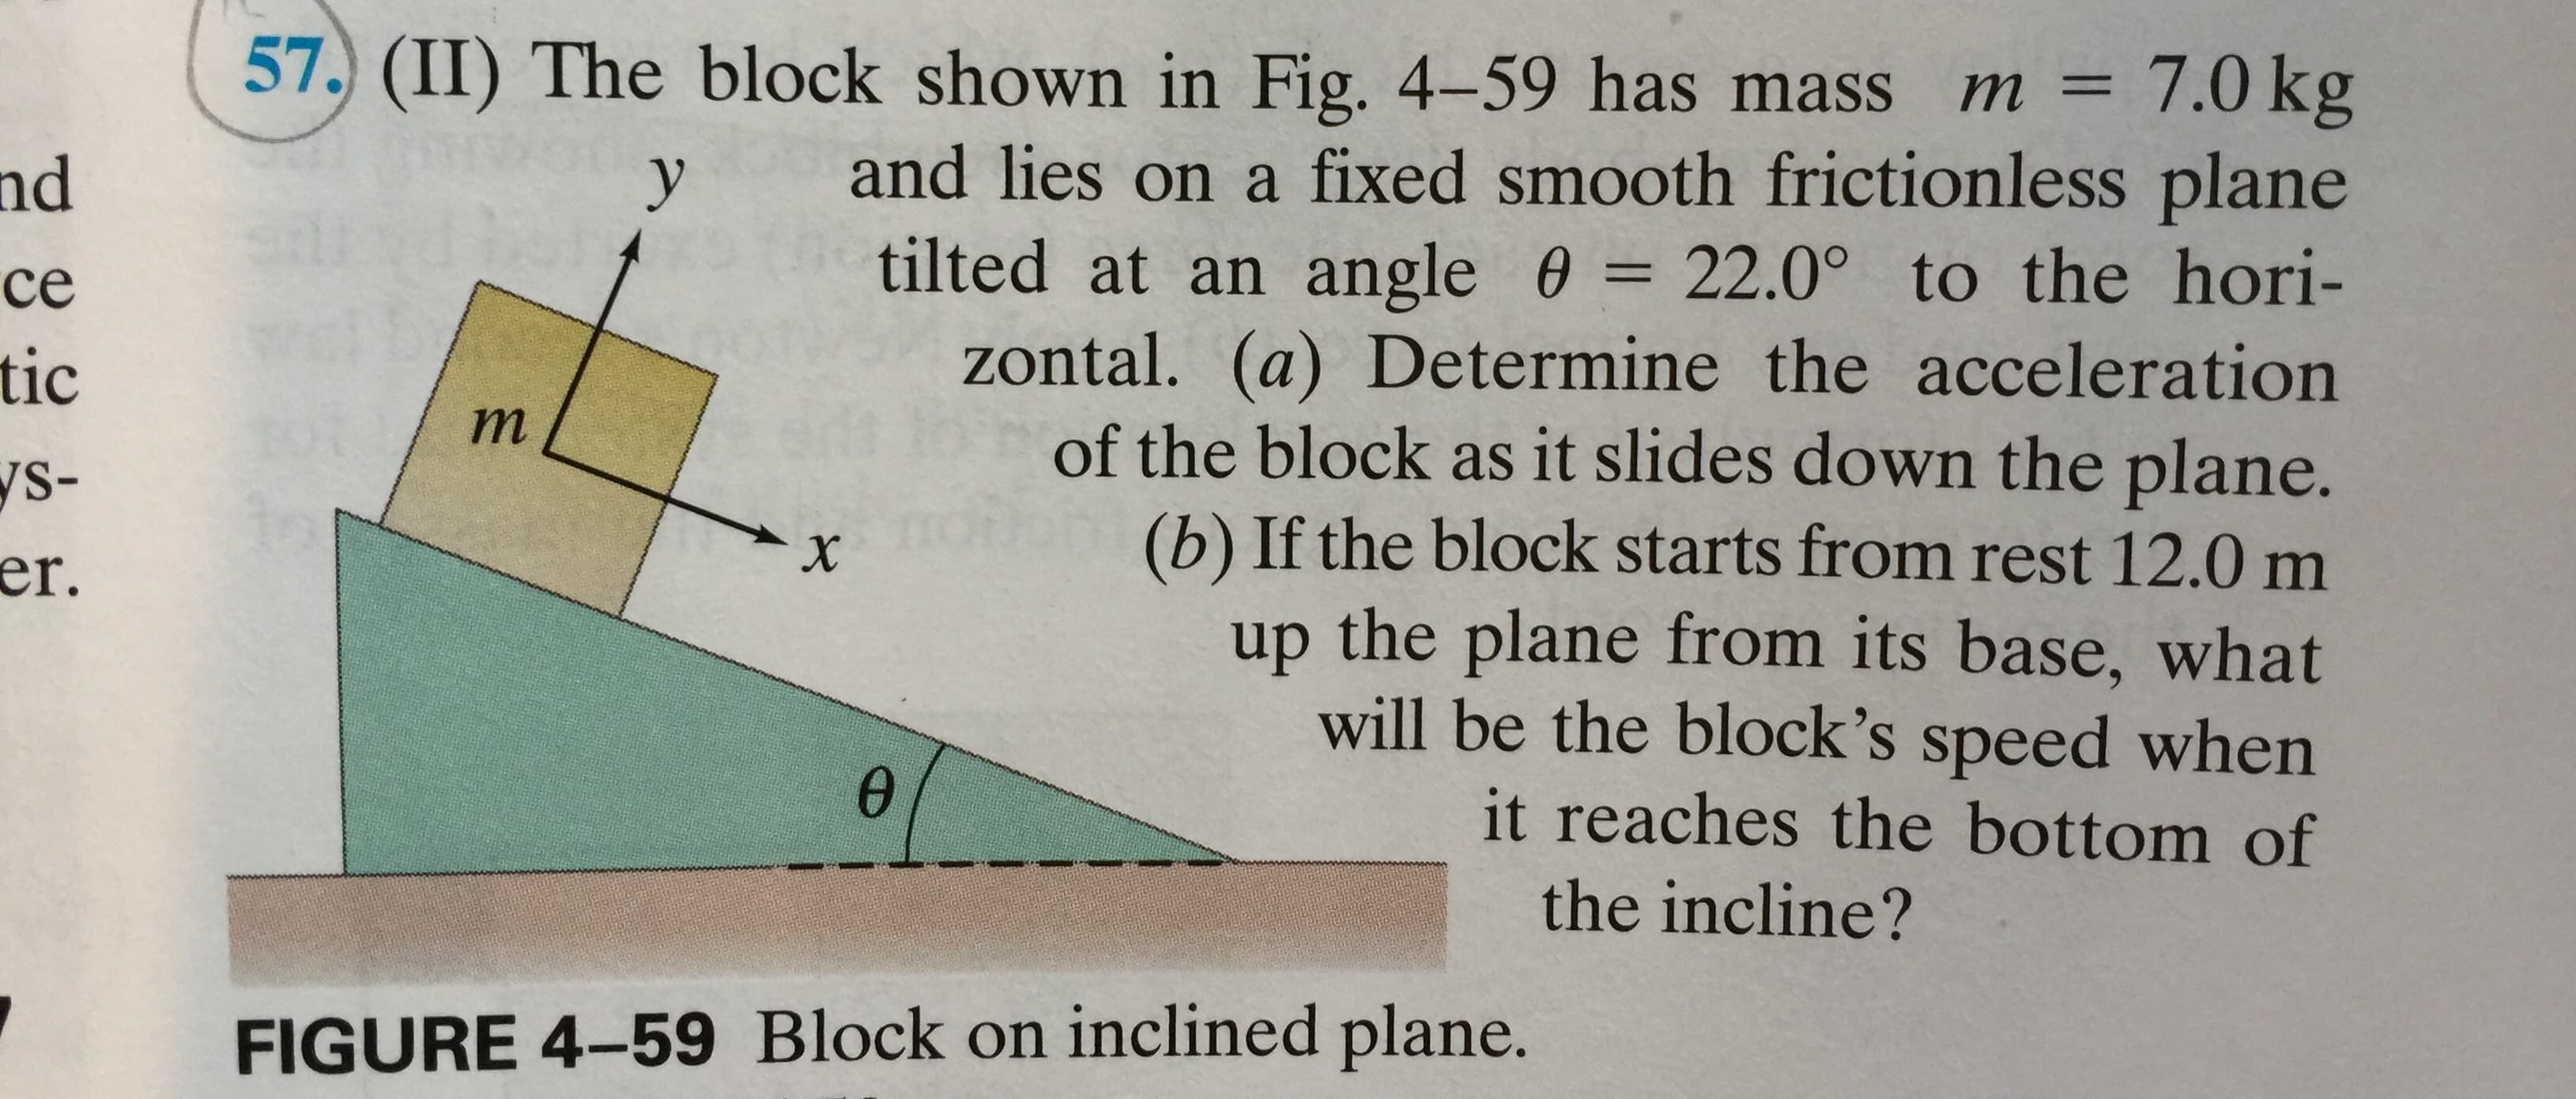 57. (II) The block shown in Fig. 4-59 has mass m = 7.0 kg
and lies on a fixed smooth frictionless plane
tilted at an angle 0 = 22.0° to the hori-
zontal. (a) Determine the acceleration
of the block as it slides down the plane.
(b) If the block starts from rest 12.0 m
up the plane from its base, what
will be the block's speed when
nd
у
се
tic
т
ys-
er.
X
it reaches the bottom of
the incline?
FIGURE 4-59 Block on inclined plane.
8 9
